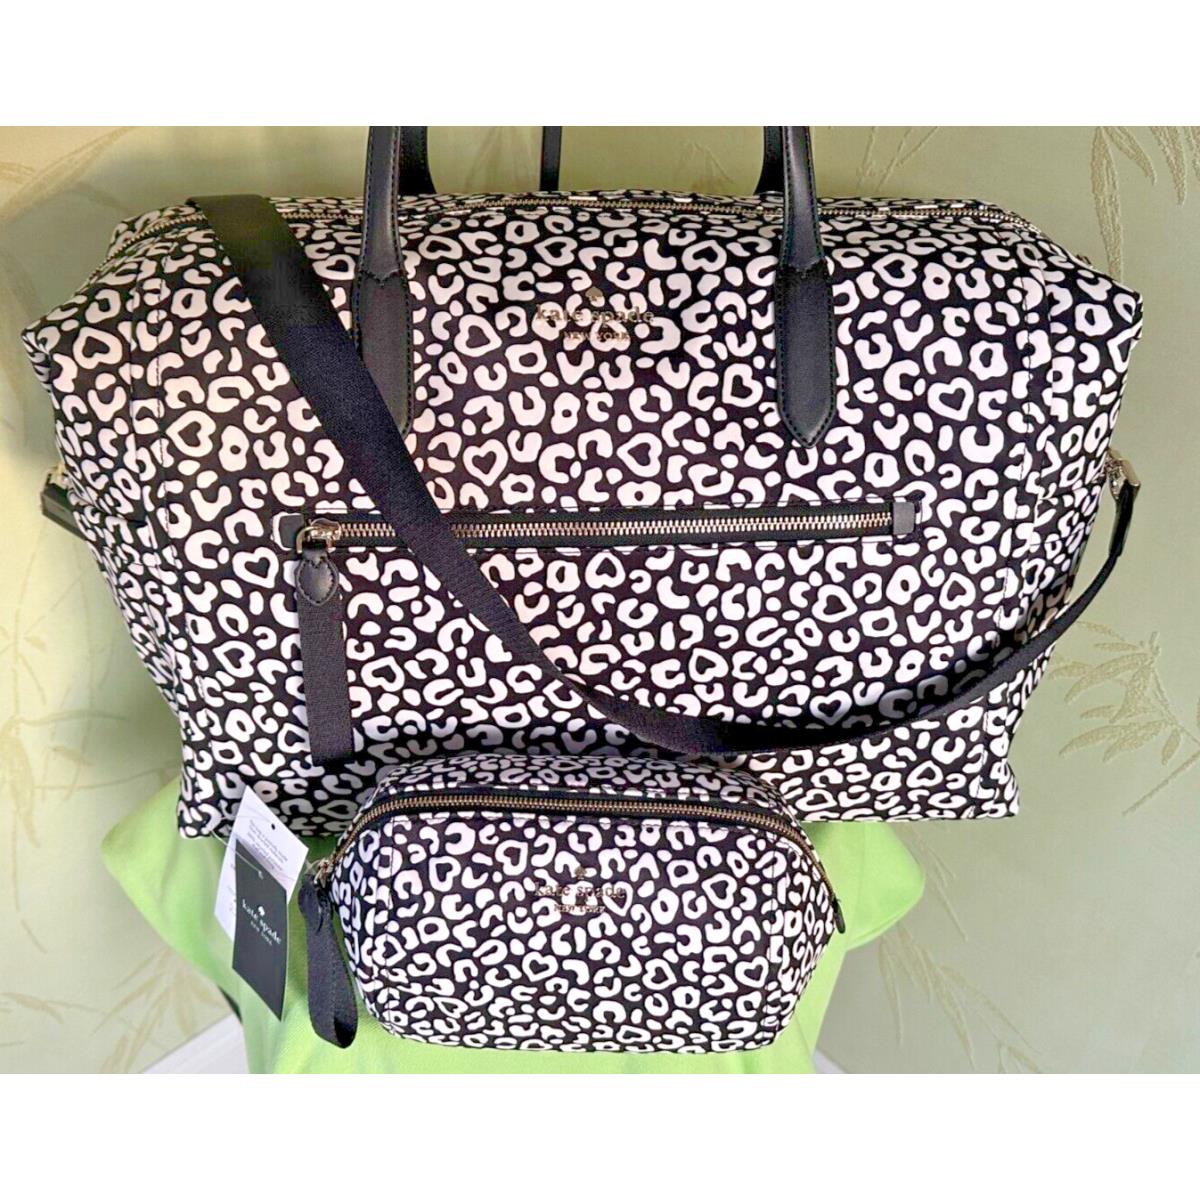 Kate Spade Leopard Heart Weekender Bag + Cosmetic Case Set :nwt Travel/carry-on